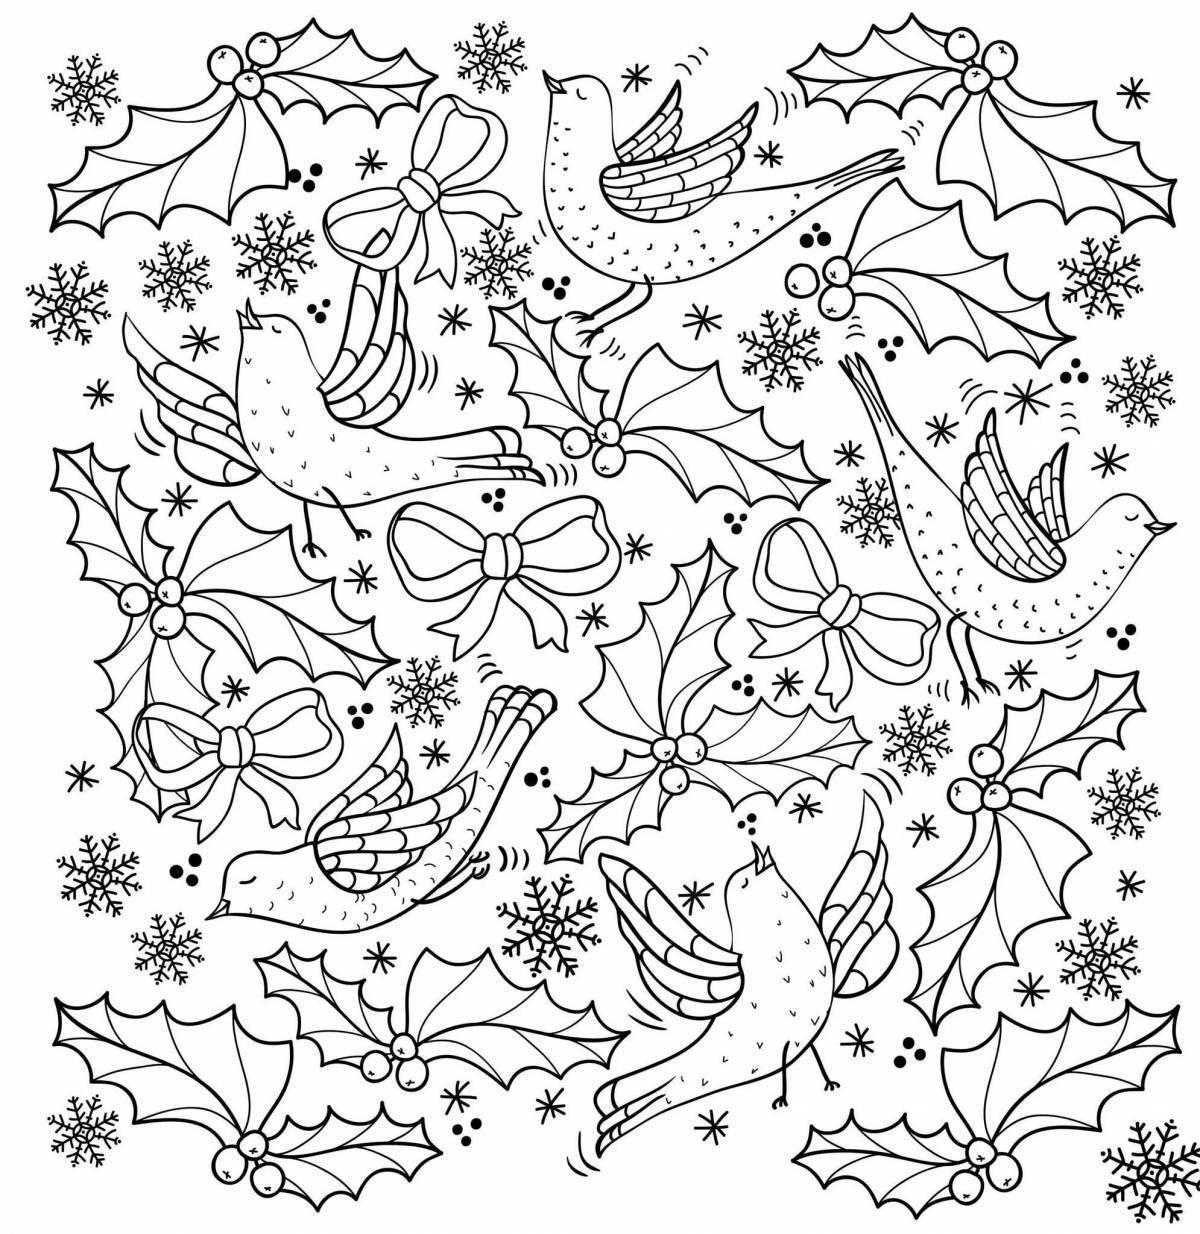 Delightful adult winter coloring book